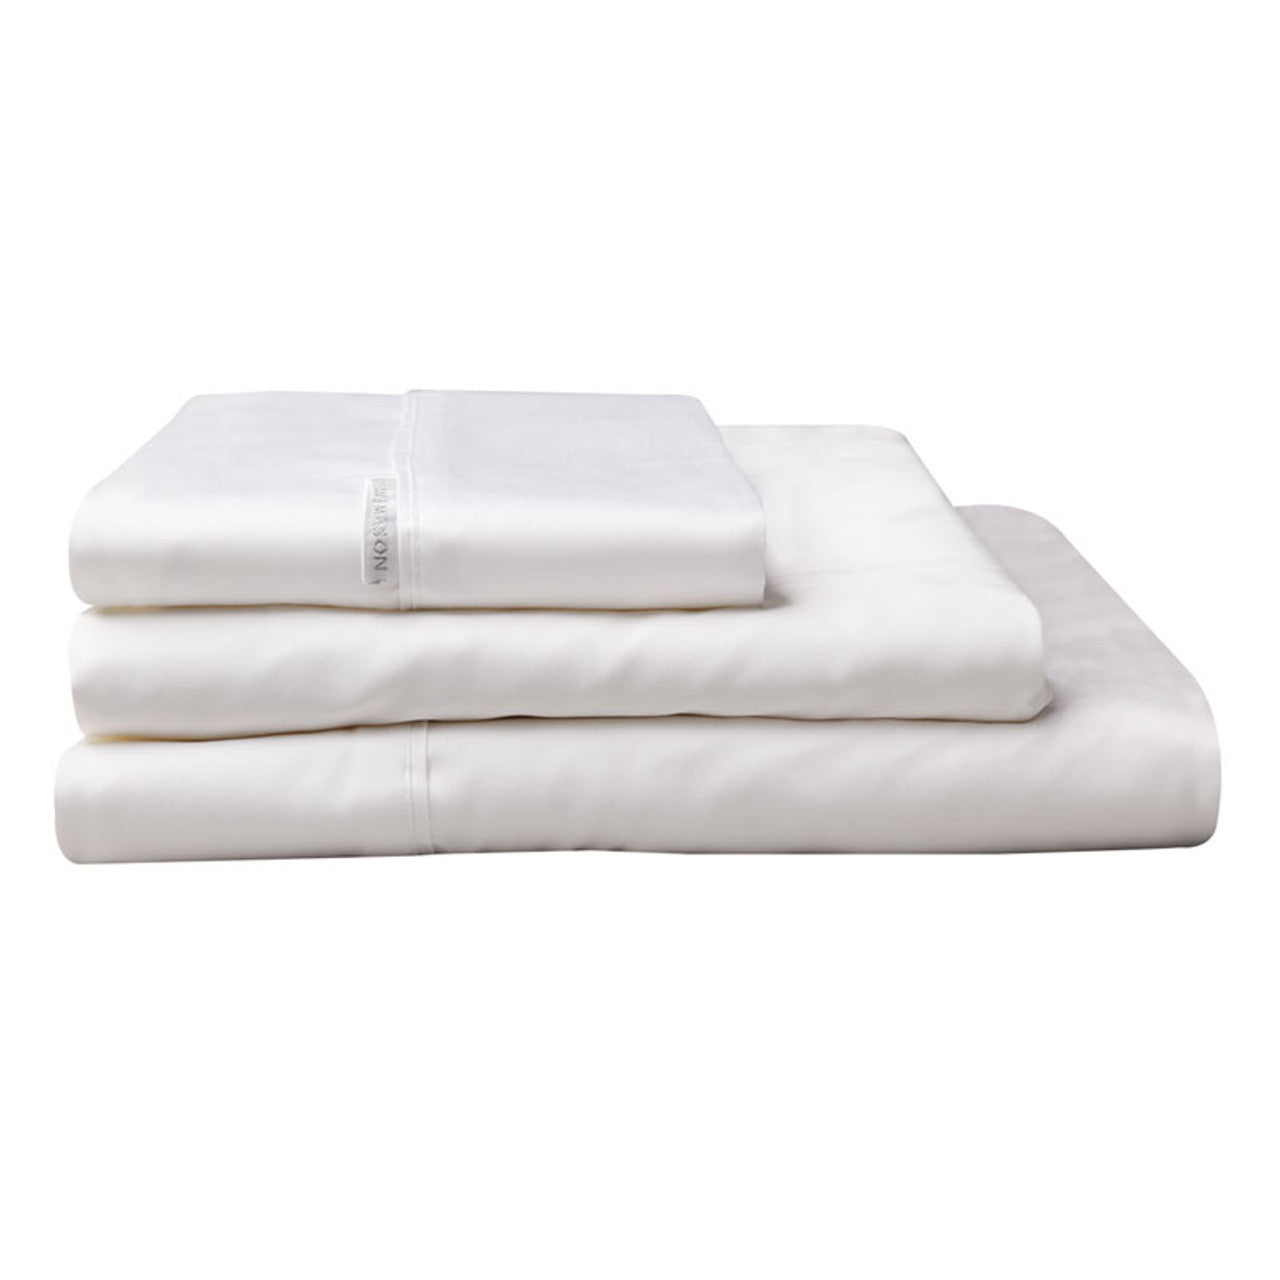 Indulge in the pinnacle of luxury with the White Bed Sheet Sets by Logan and Mason. Crafted from pure Egyptian Cotton with an impressive 400 thread count, these sheets offer unparalleled softness and a silky smooth feel.